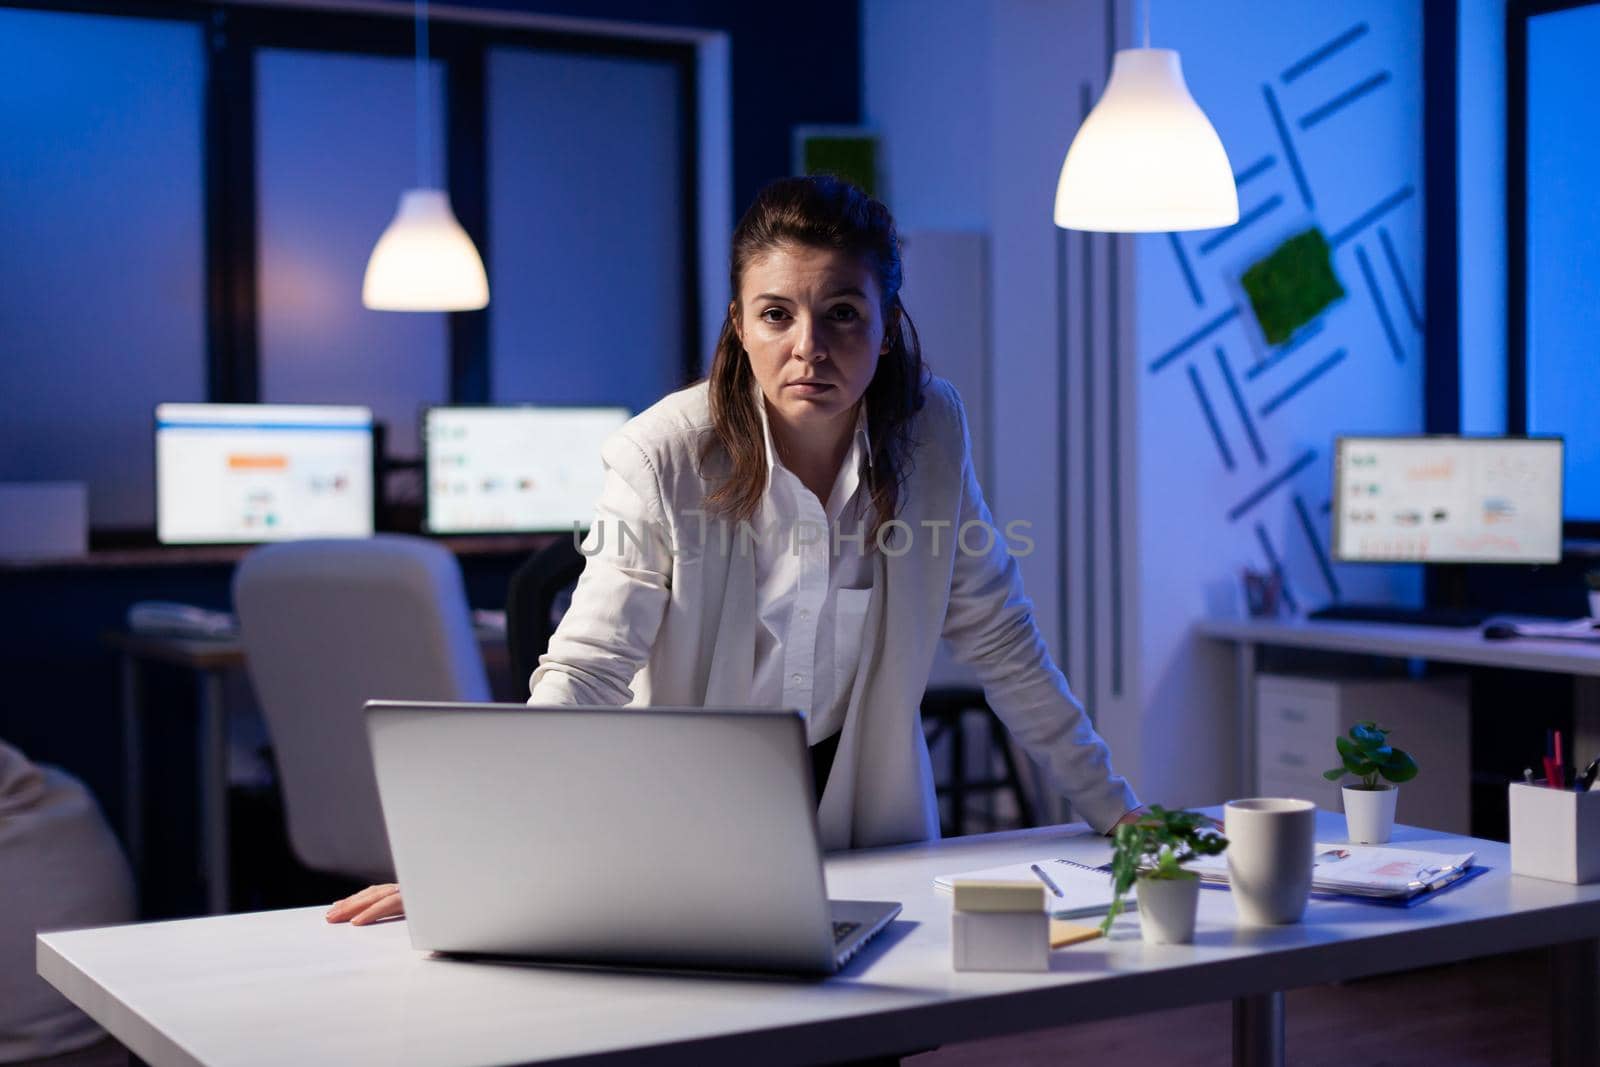 Business woman looking tired at camera standing near desk in start-up business company late at night. Focused entrepreneur using technology network wireless for developing new marketing system